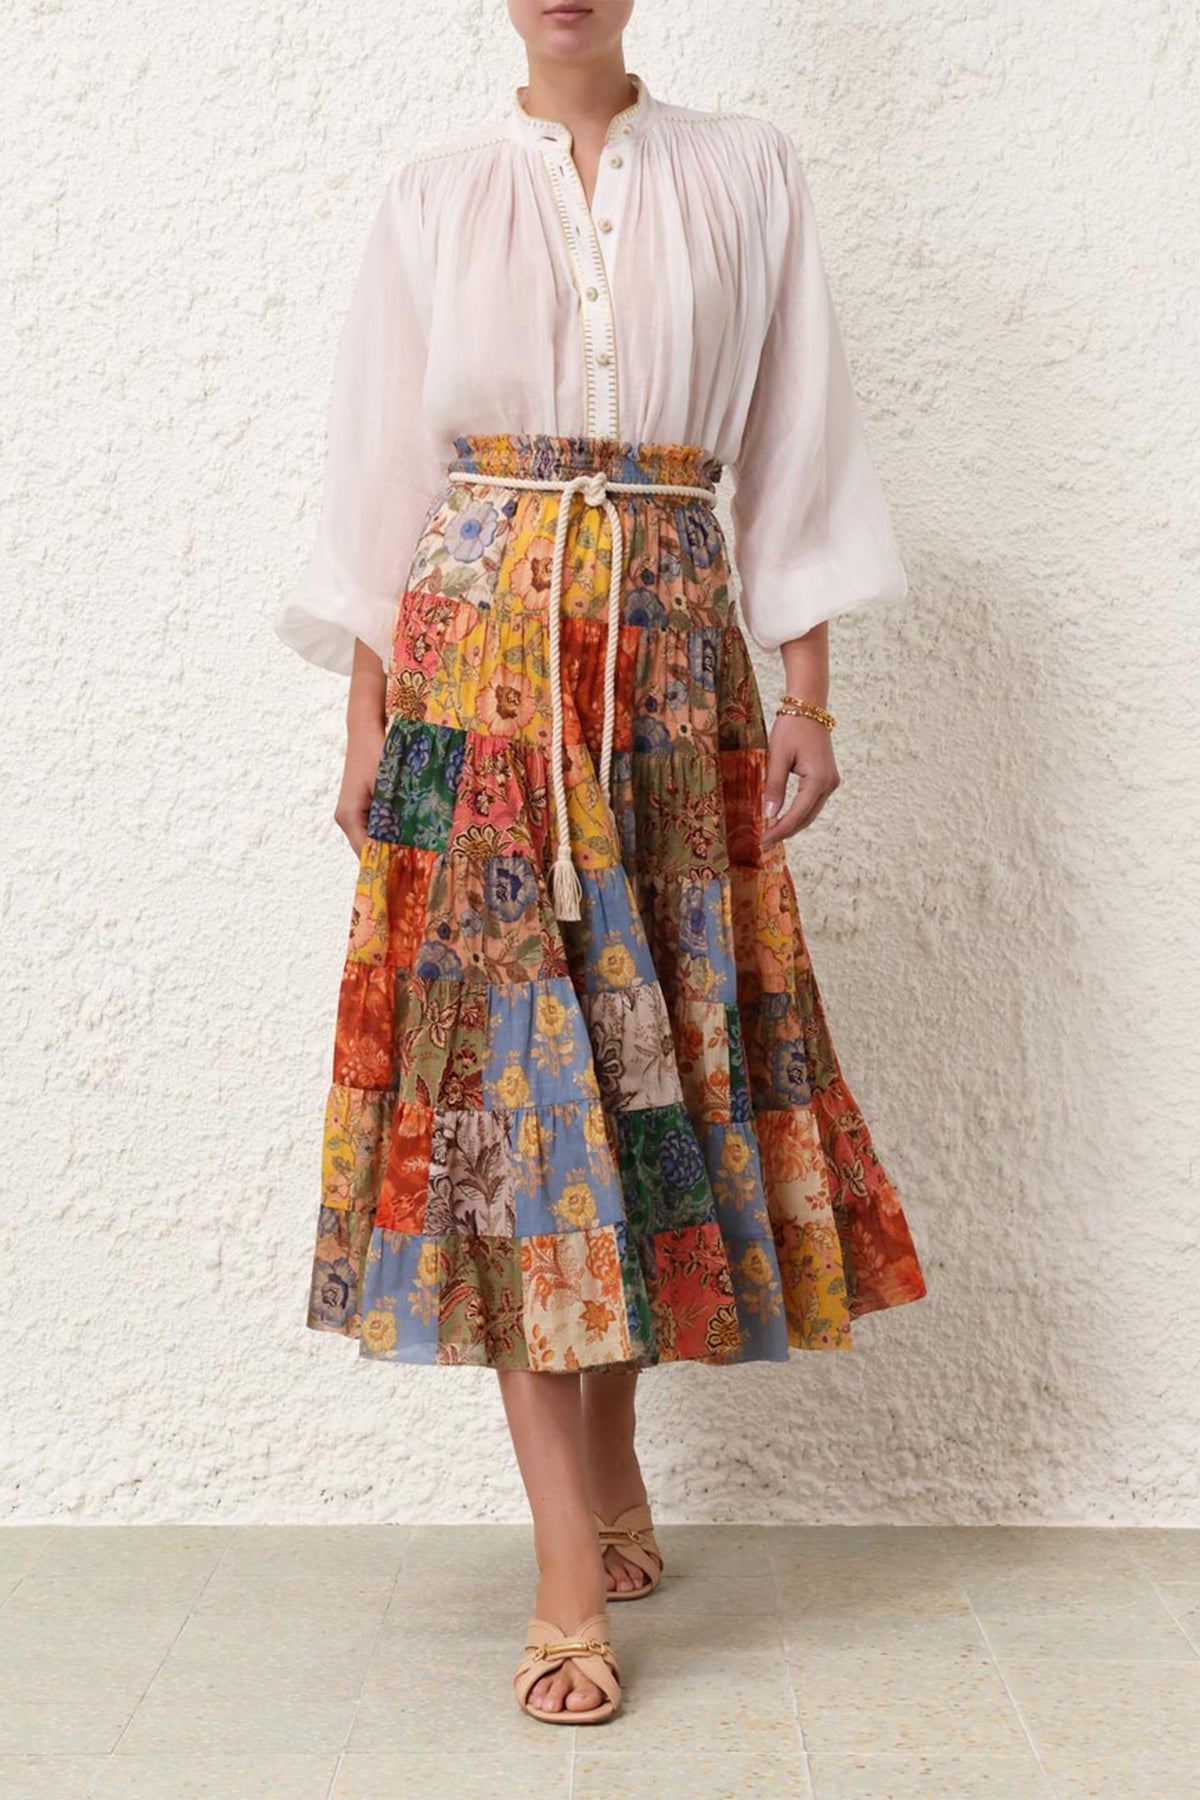 Junie Tiered Midi Skirt in Patch Floral - shop-olivia.com